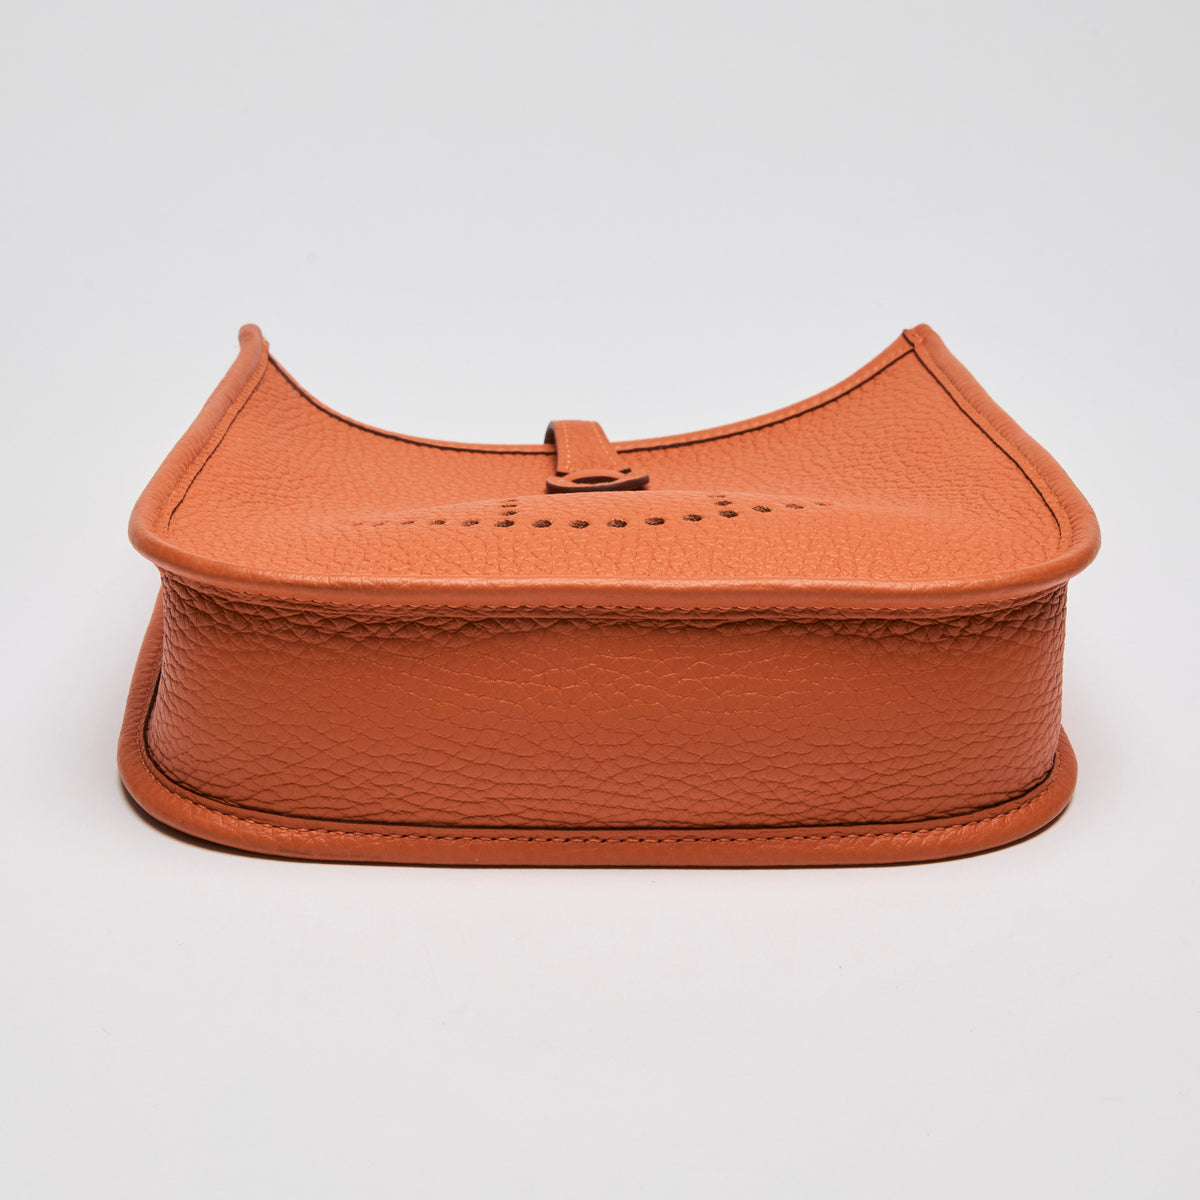 Excellent Pre-Loved Hermes Mini Evelyn Clemence Leather "Amazone" Orange (Bottom)